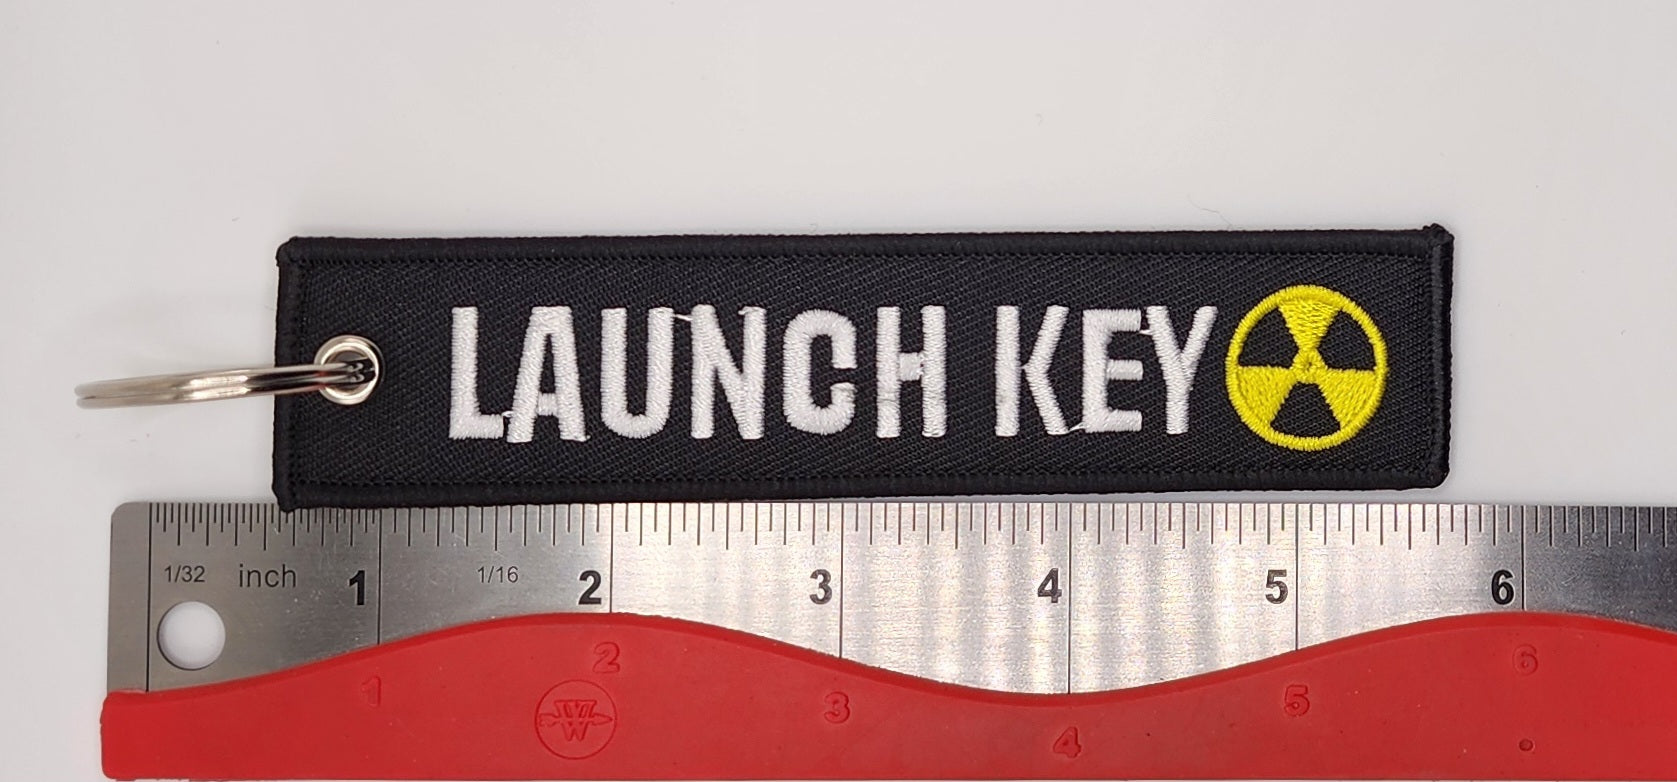 Launch Key Embroidered Keychain